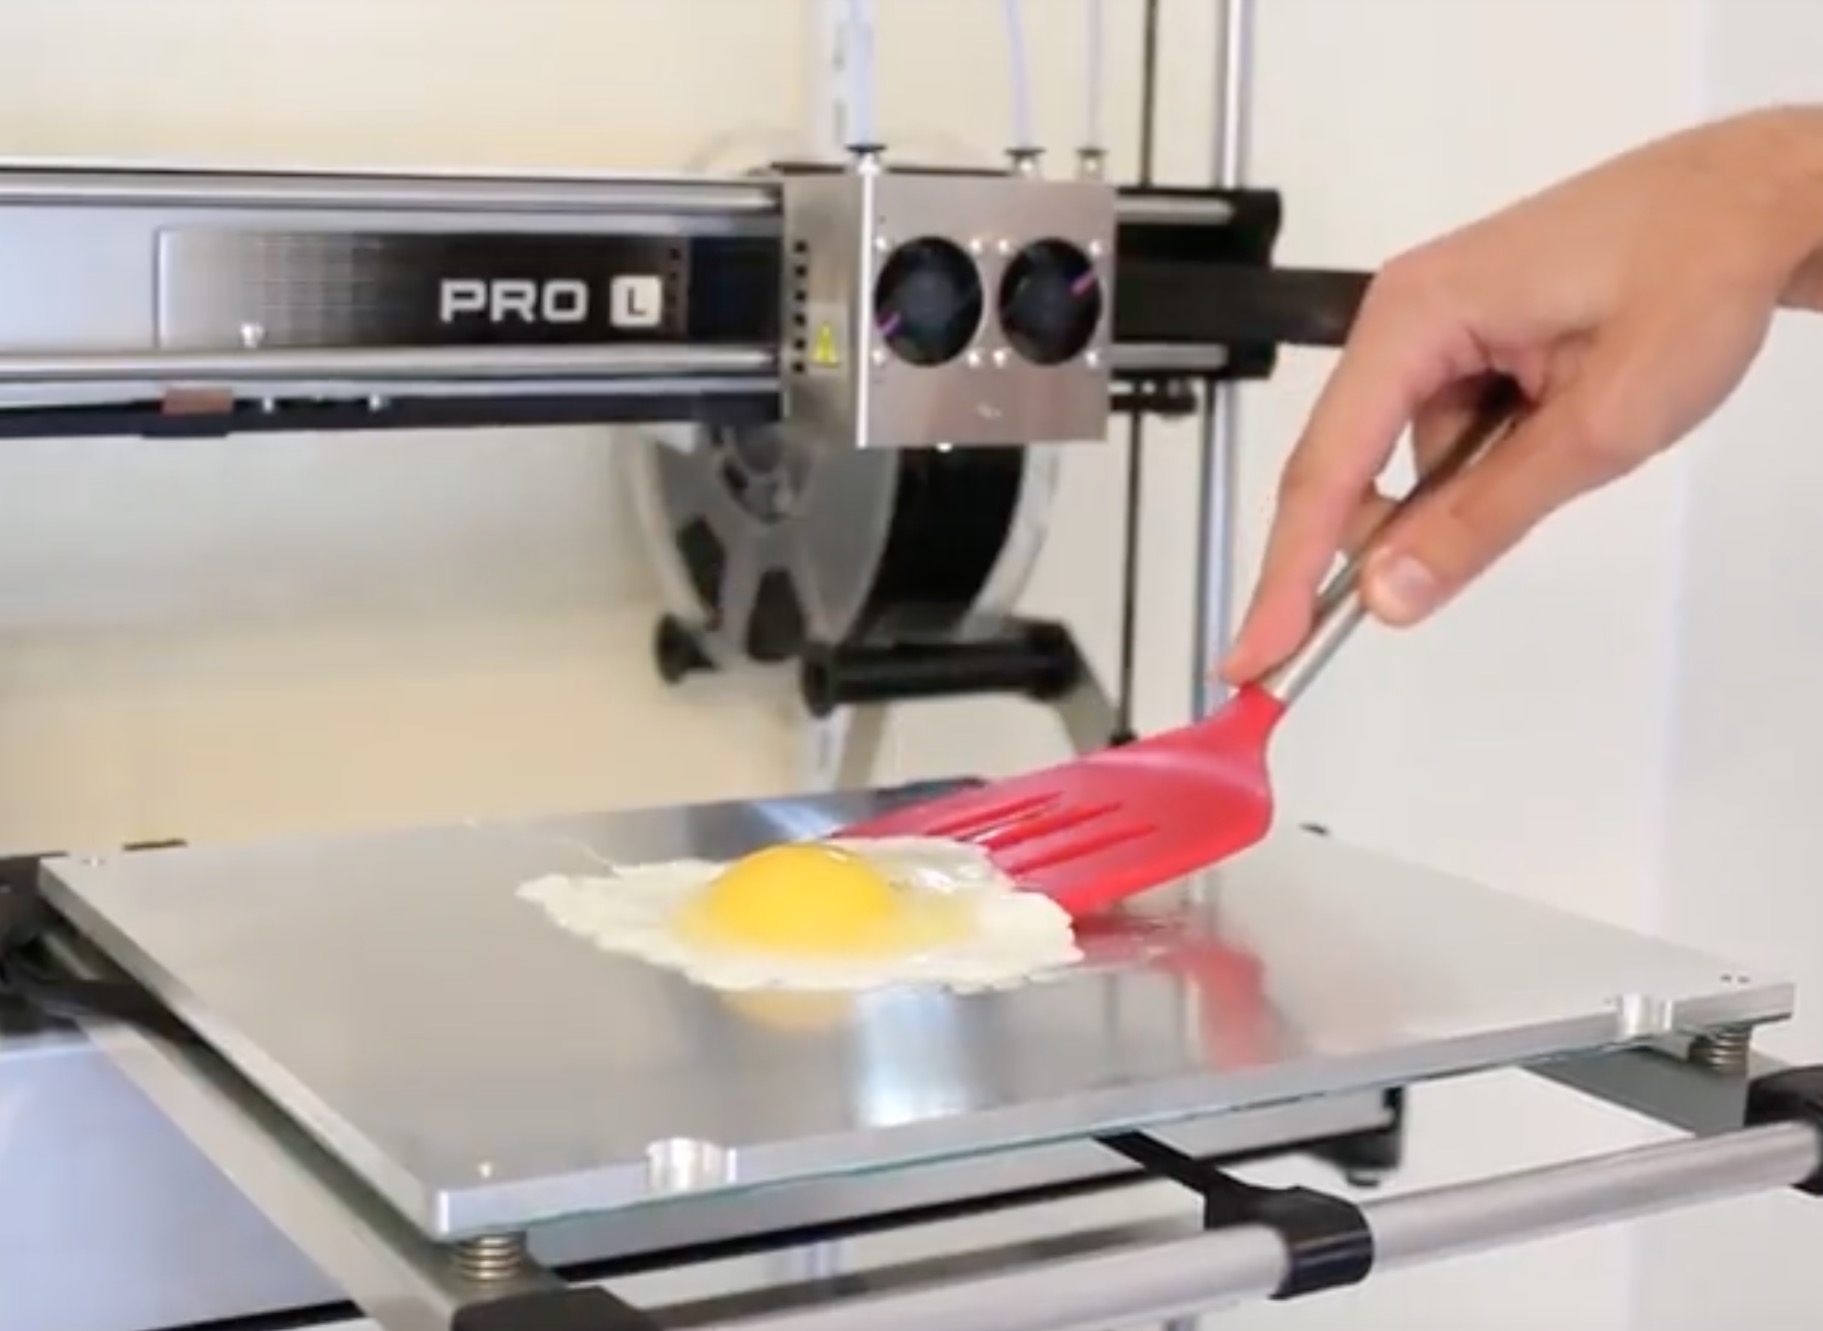  Frying eggs on the MAKEiT Pro-L 